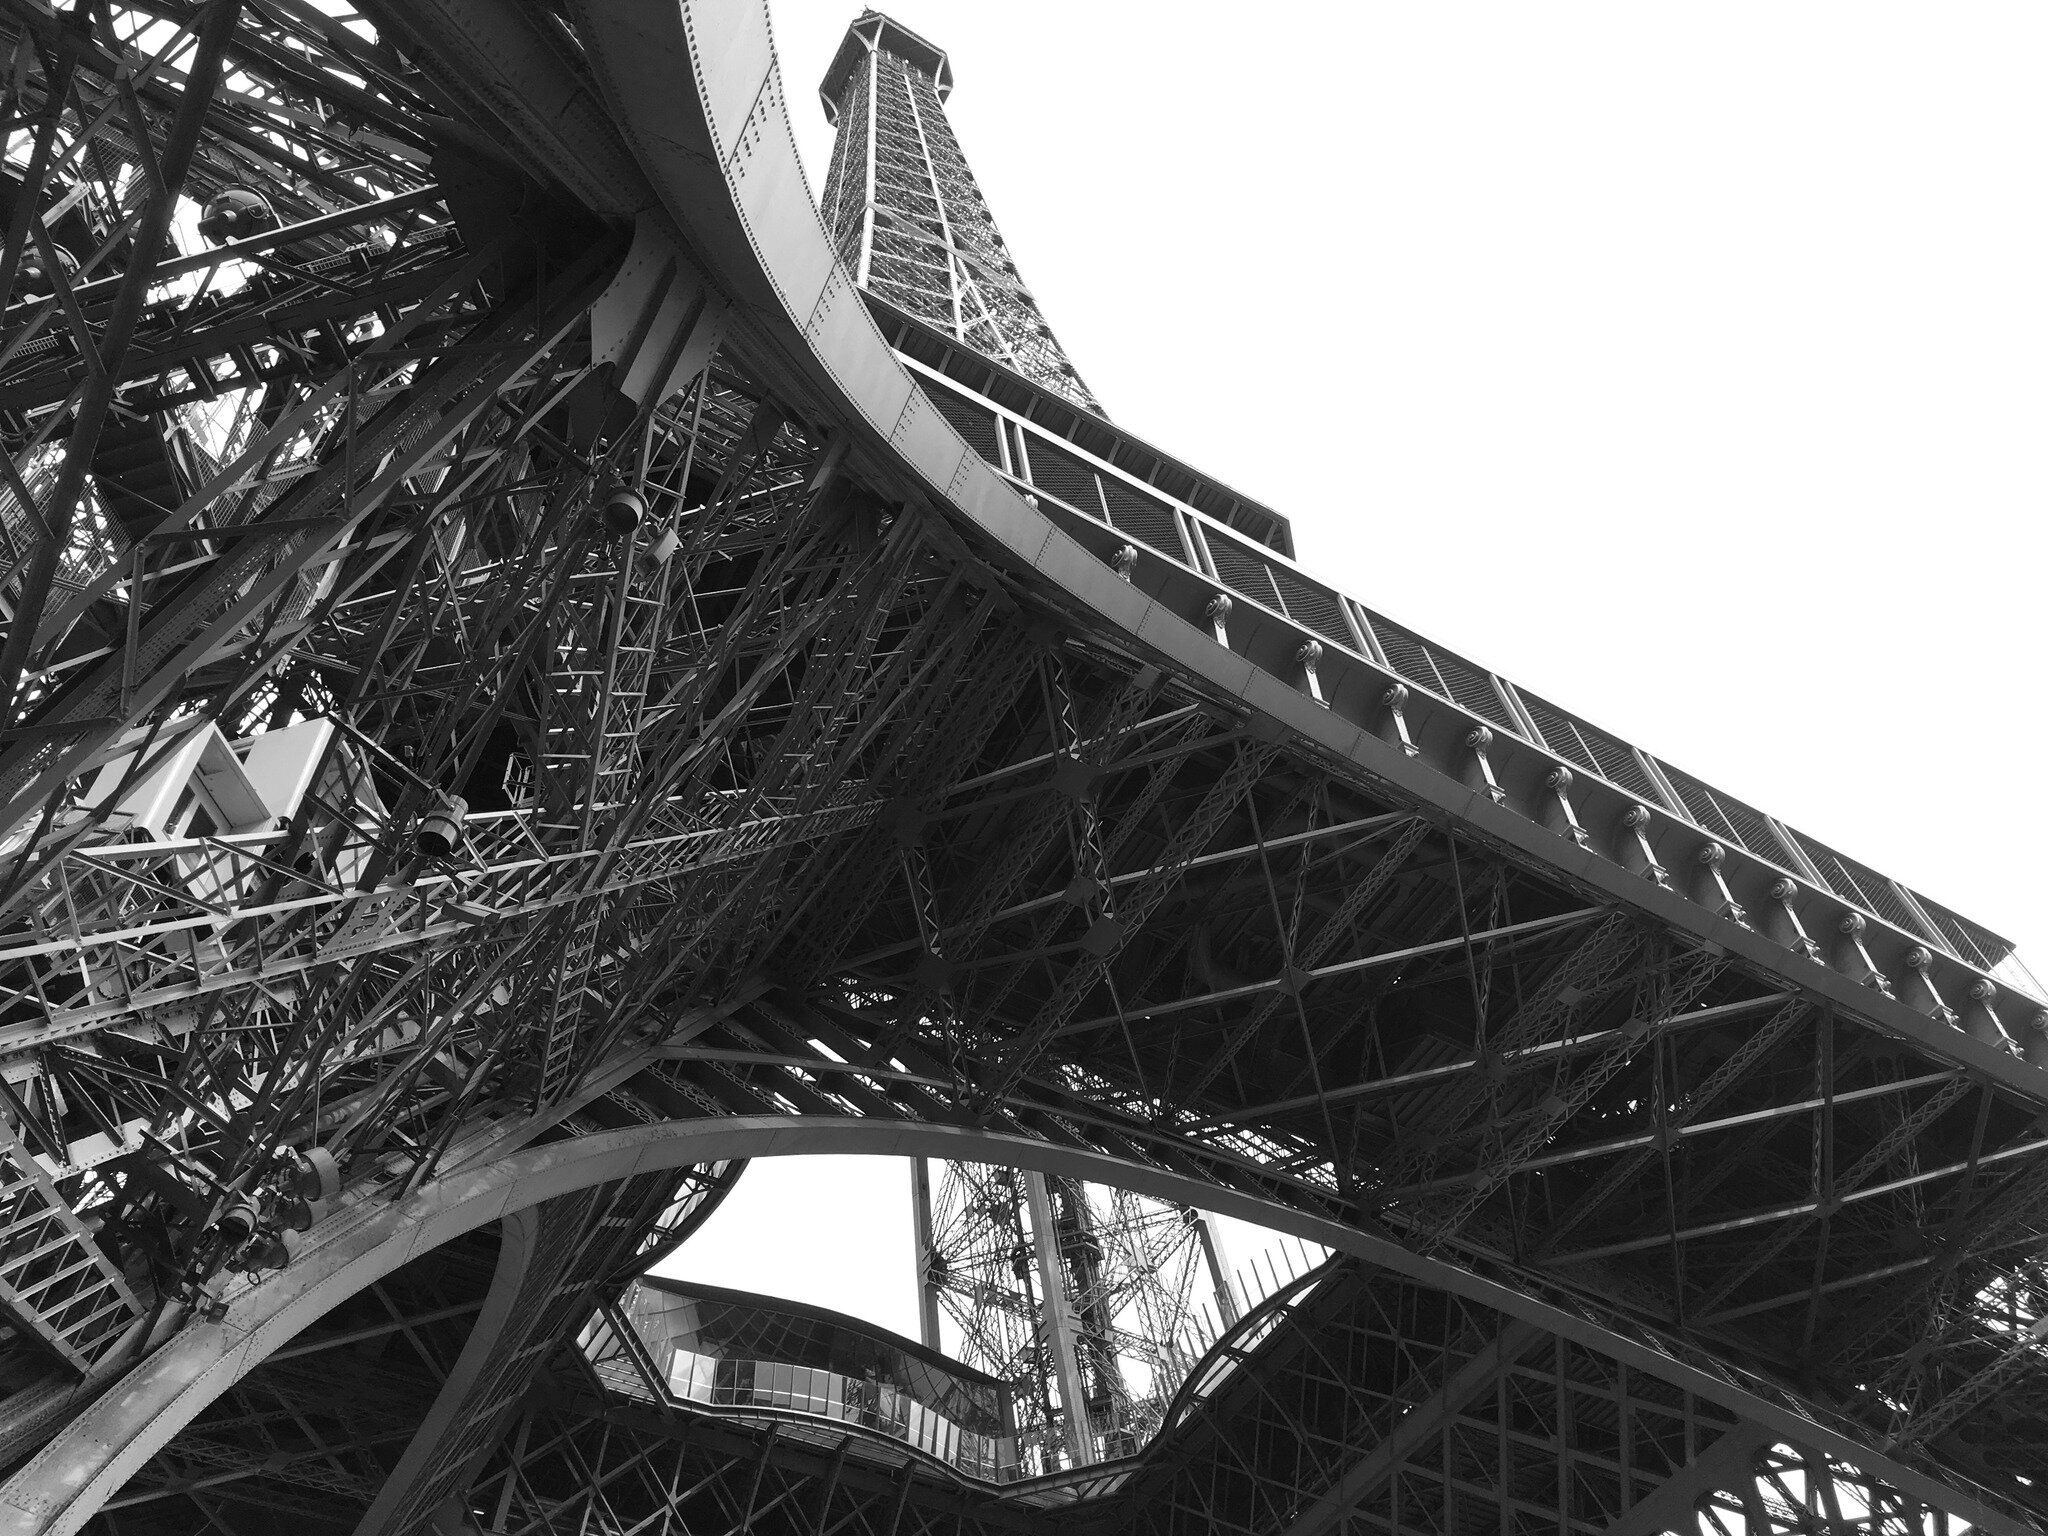 A different view of the Eiffel Tower.

#eiffeltower #photography #paris #france #travel #travelphotography #storytellingpictures